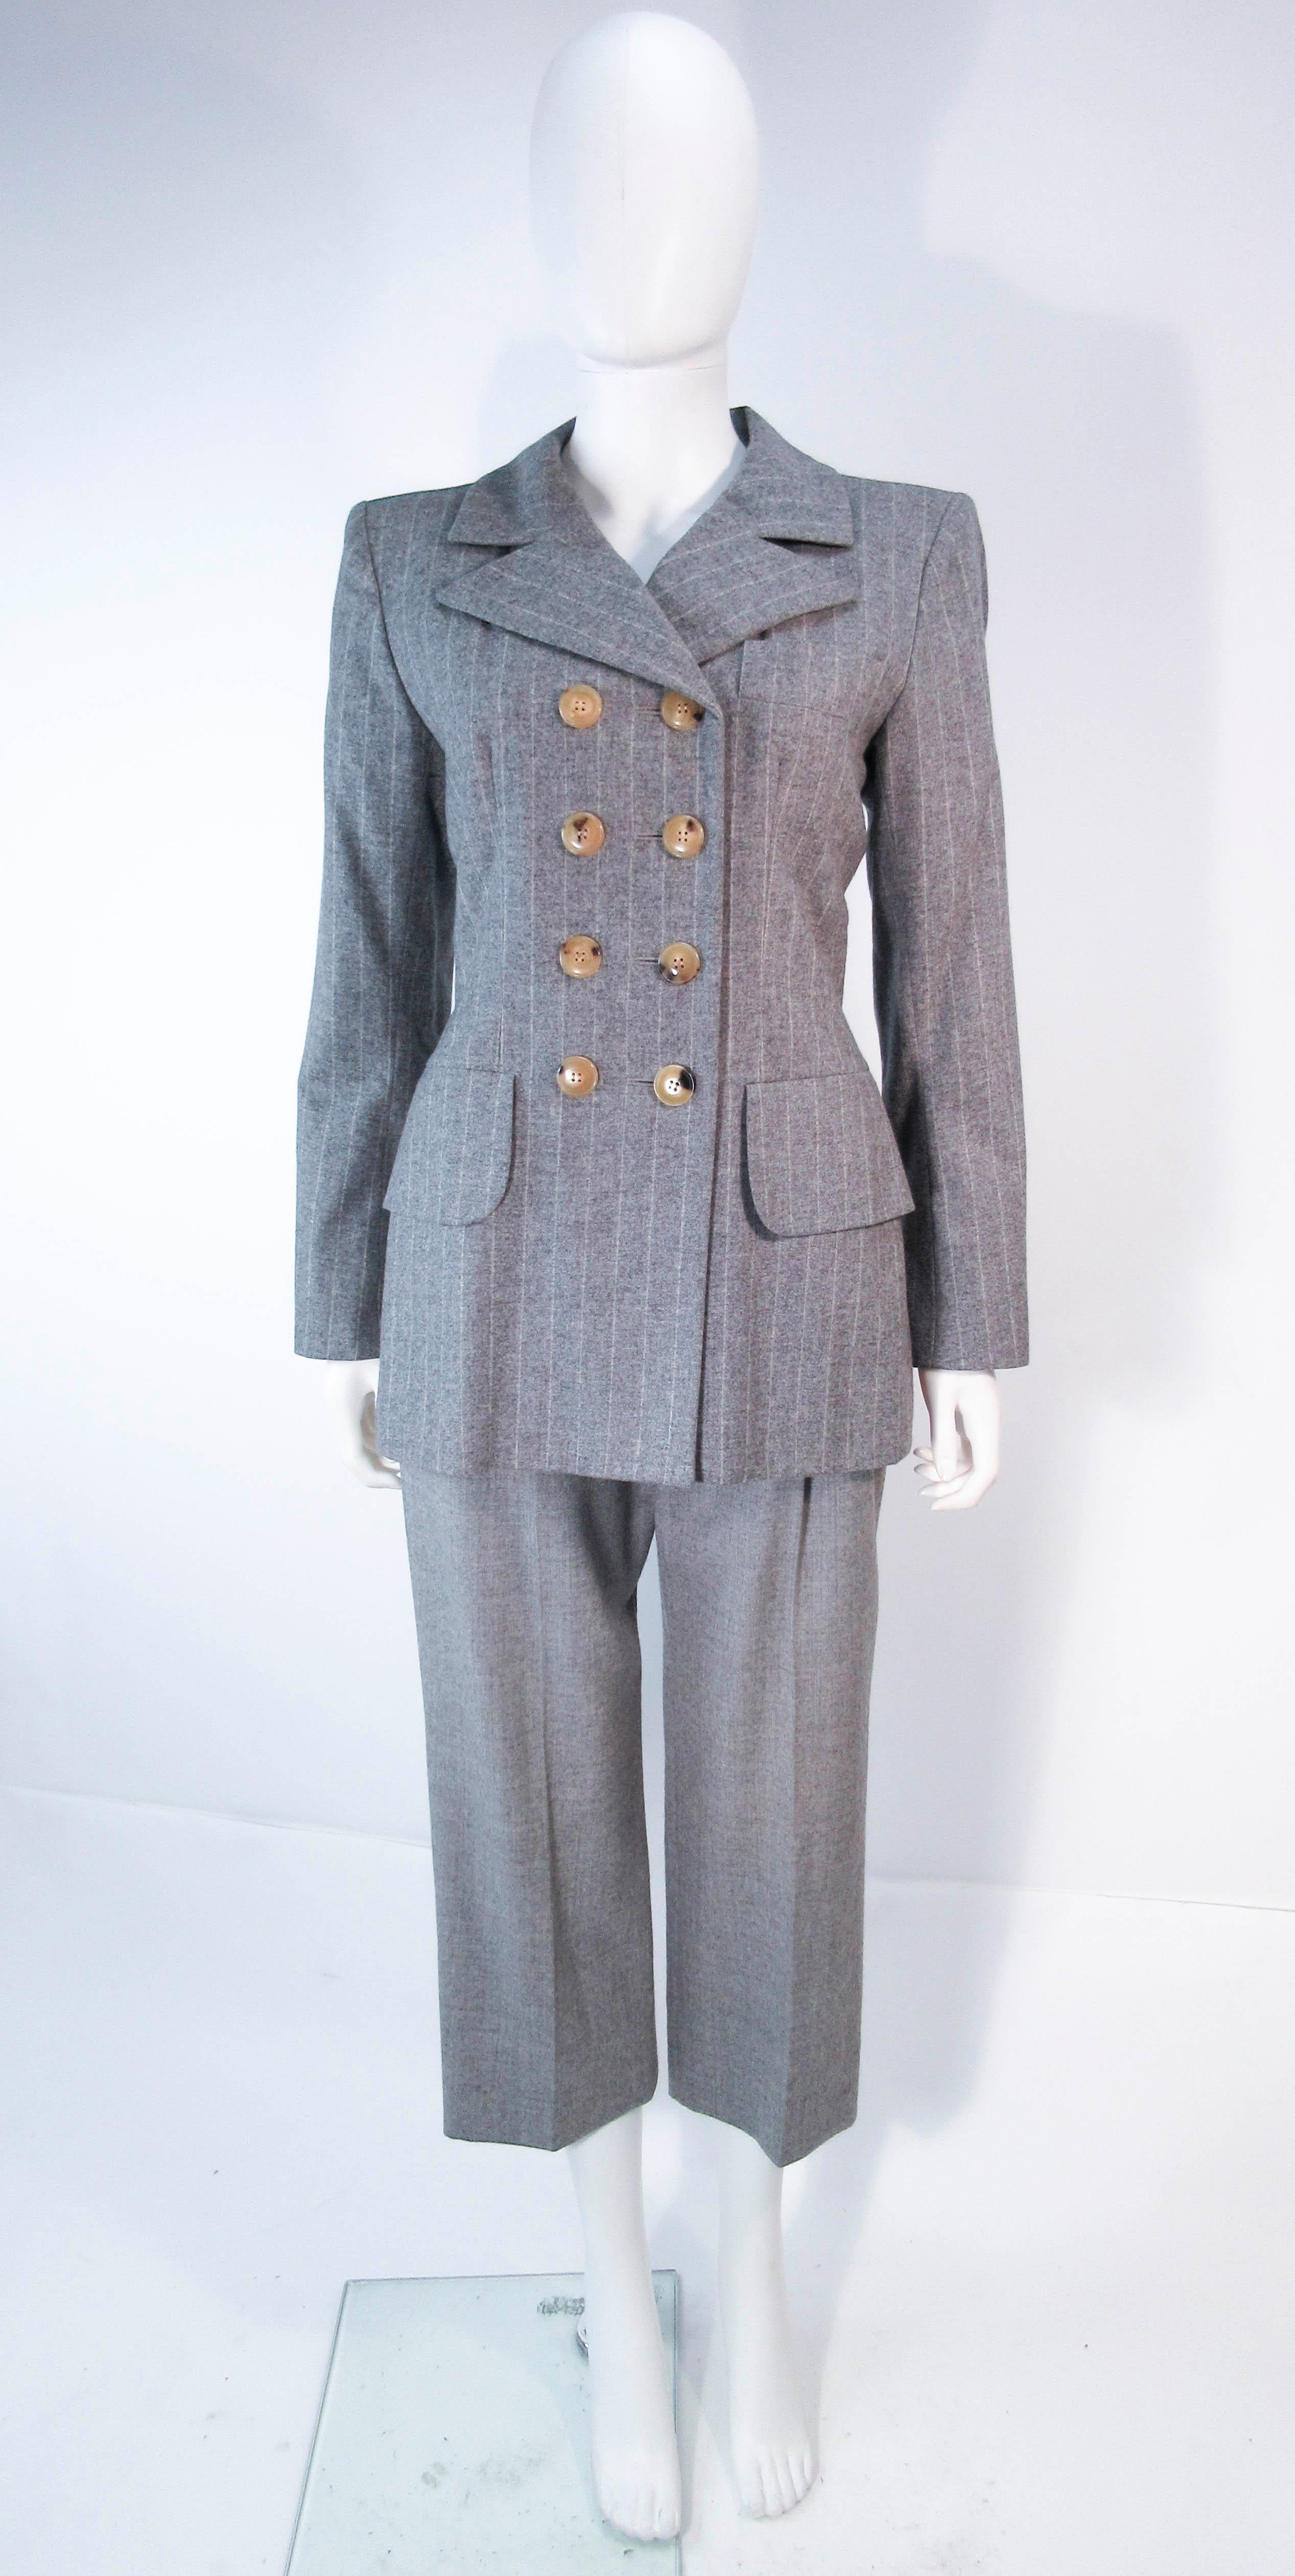 This Yves Saint Laurent suit is composed of a grey wool blend. Features a beautiful classic double breasted blazer and a wonderful cropped trouser. In excellent vintage condition (some signs of wear due to age). Made in France.

**Please